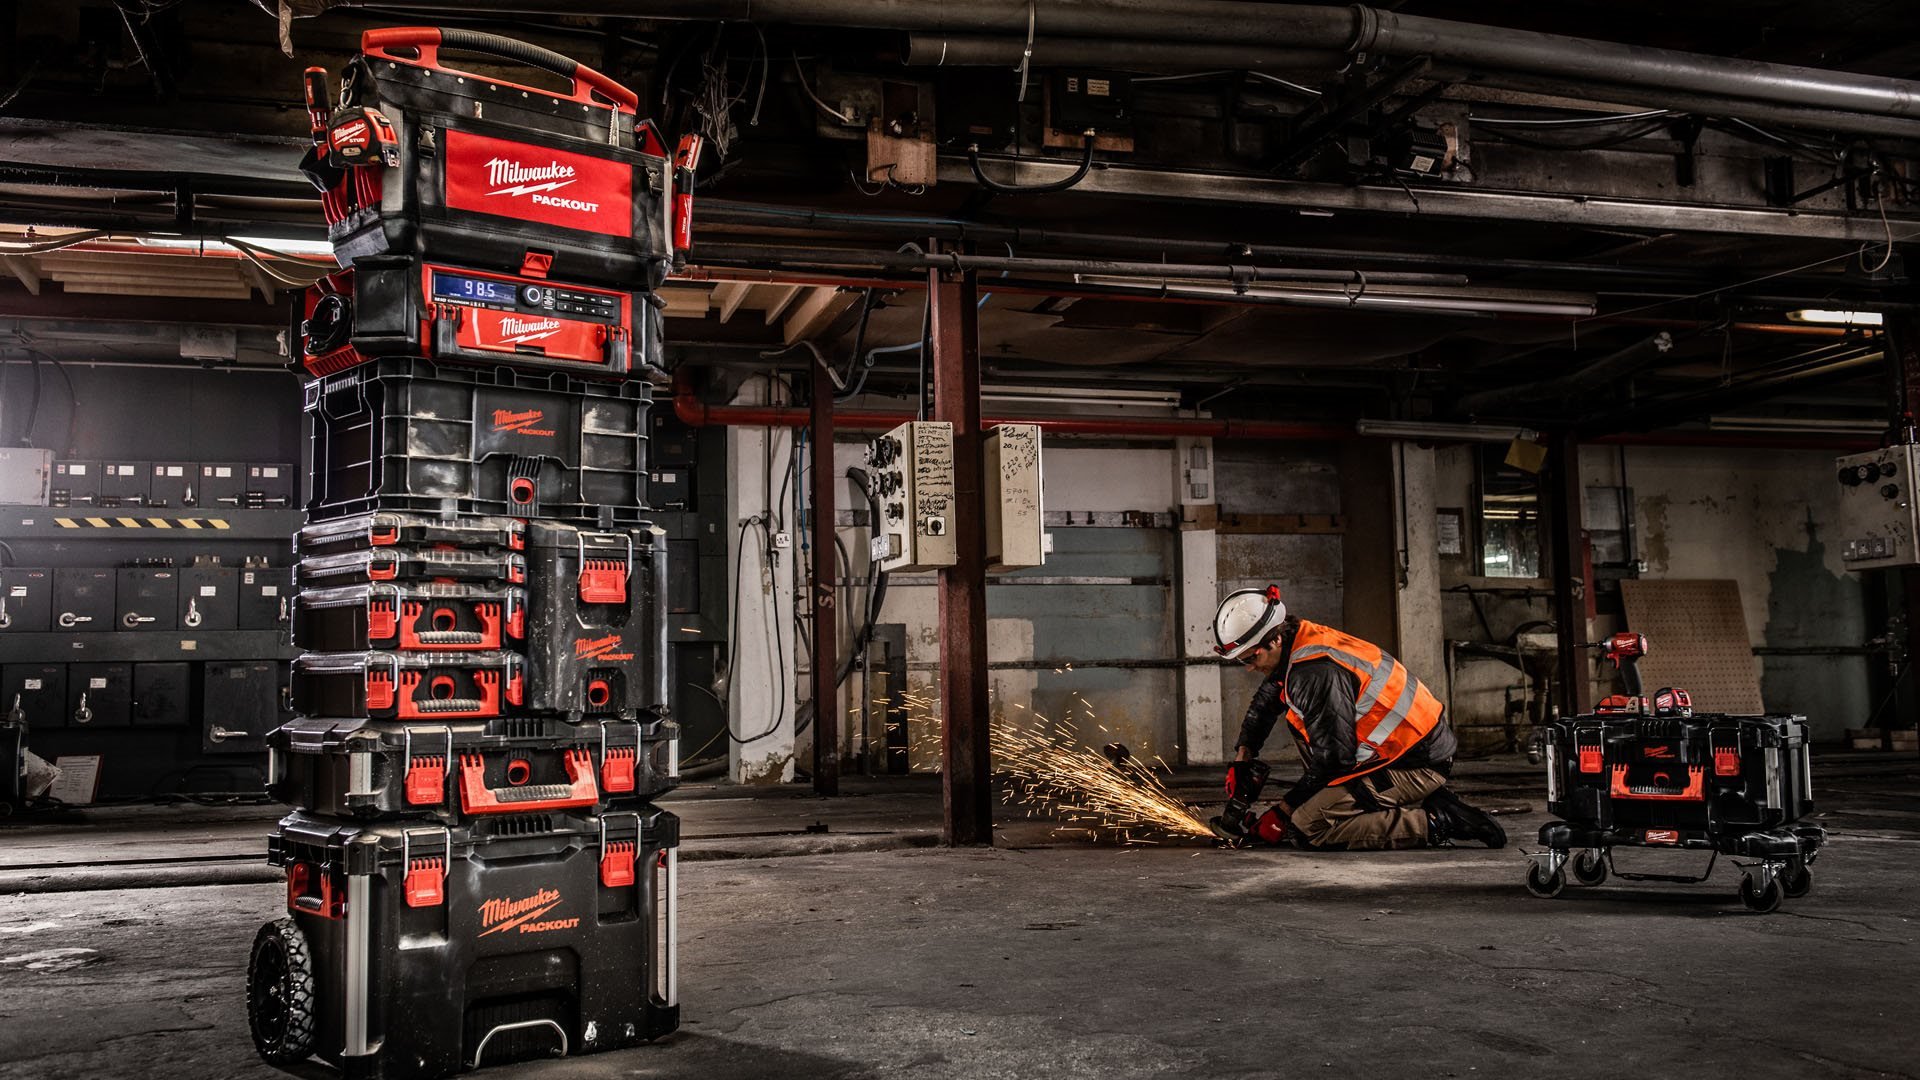 MILWAUKEE® Power Tools UK Official Site | NOTHING BUT HEAVY DUTY 